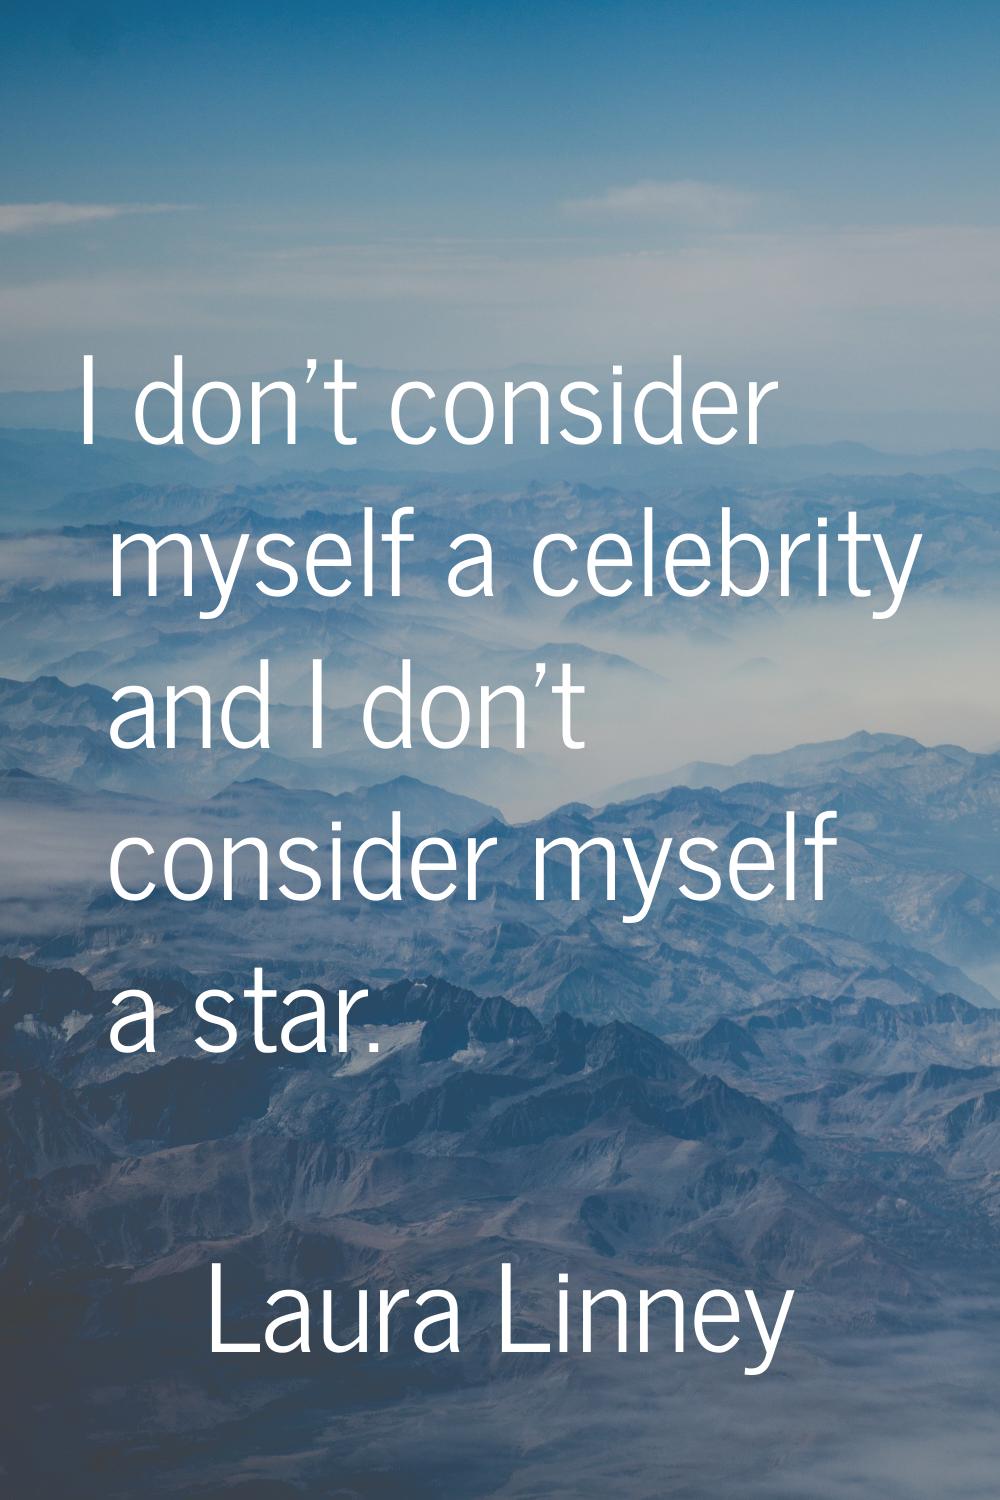 I don't consider myself a celebrity and I don't consider myself a star.